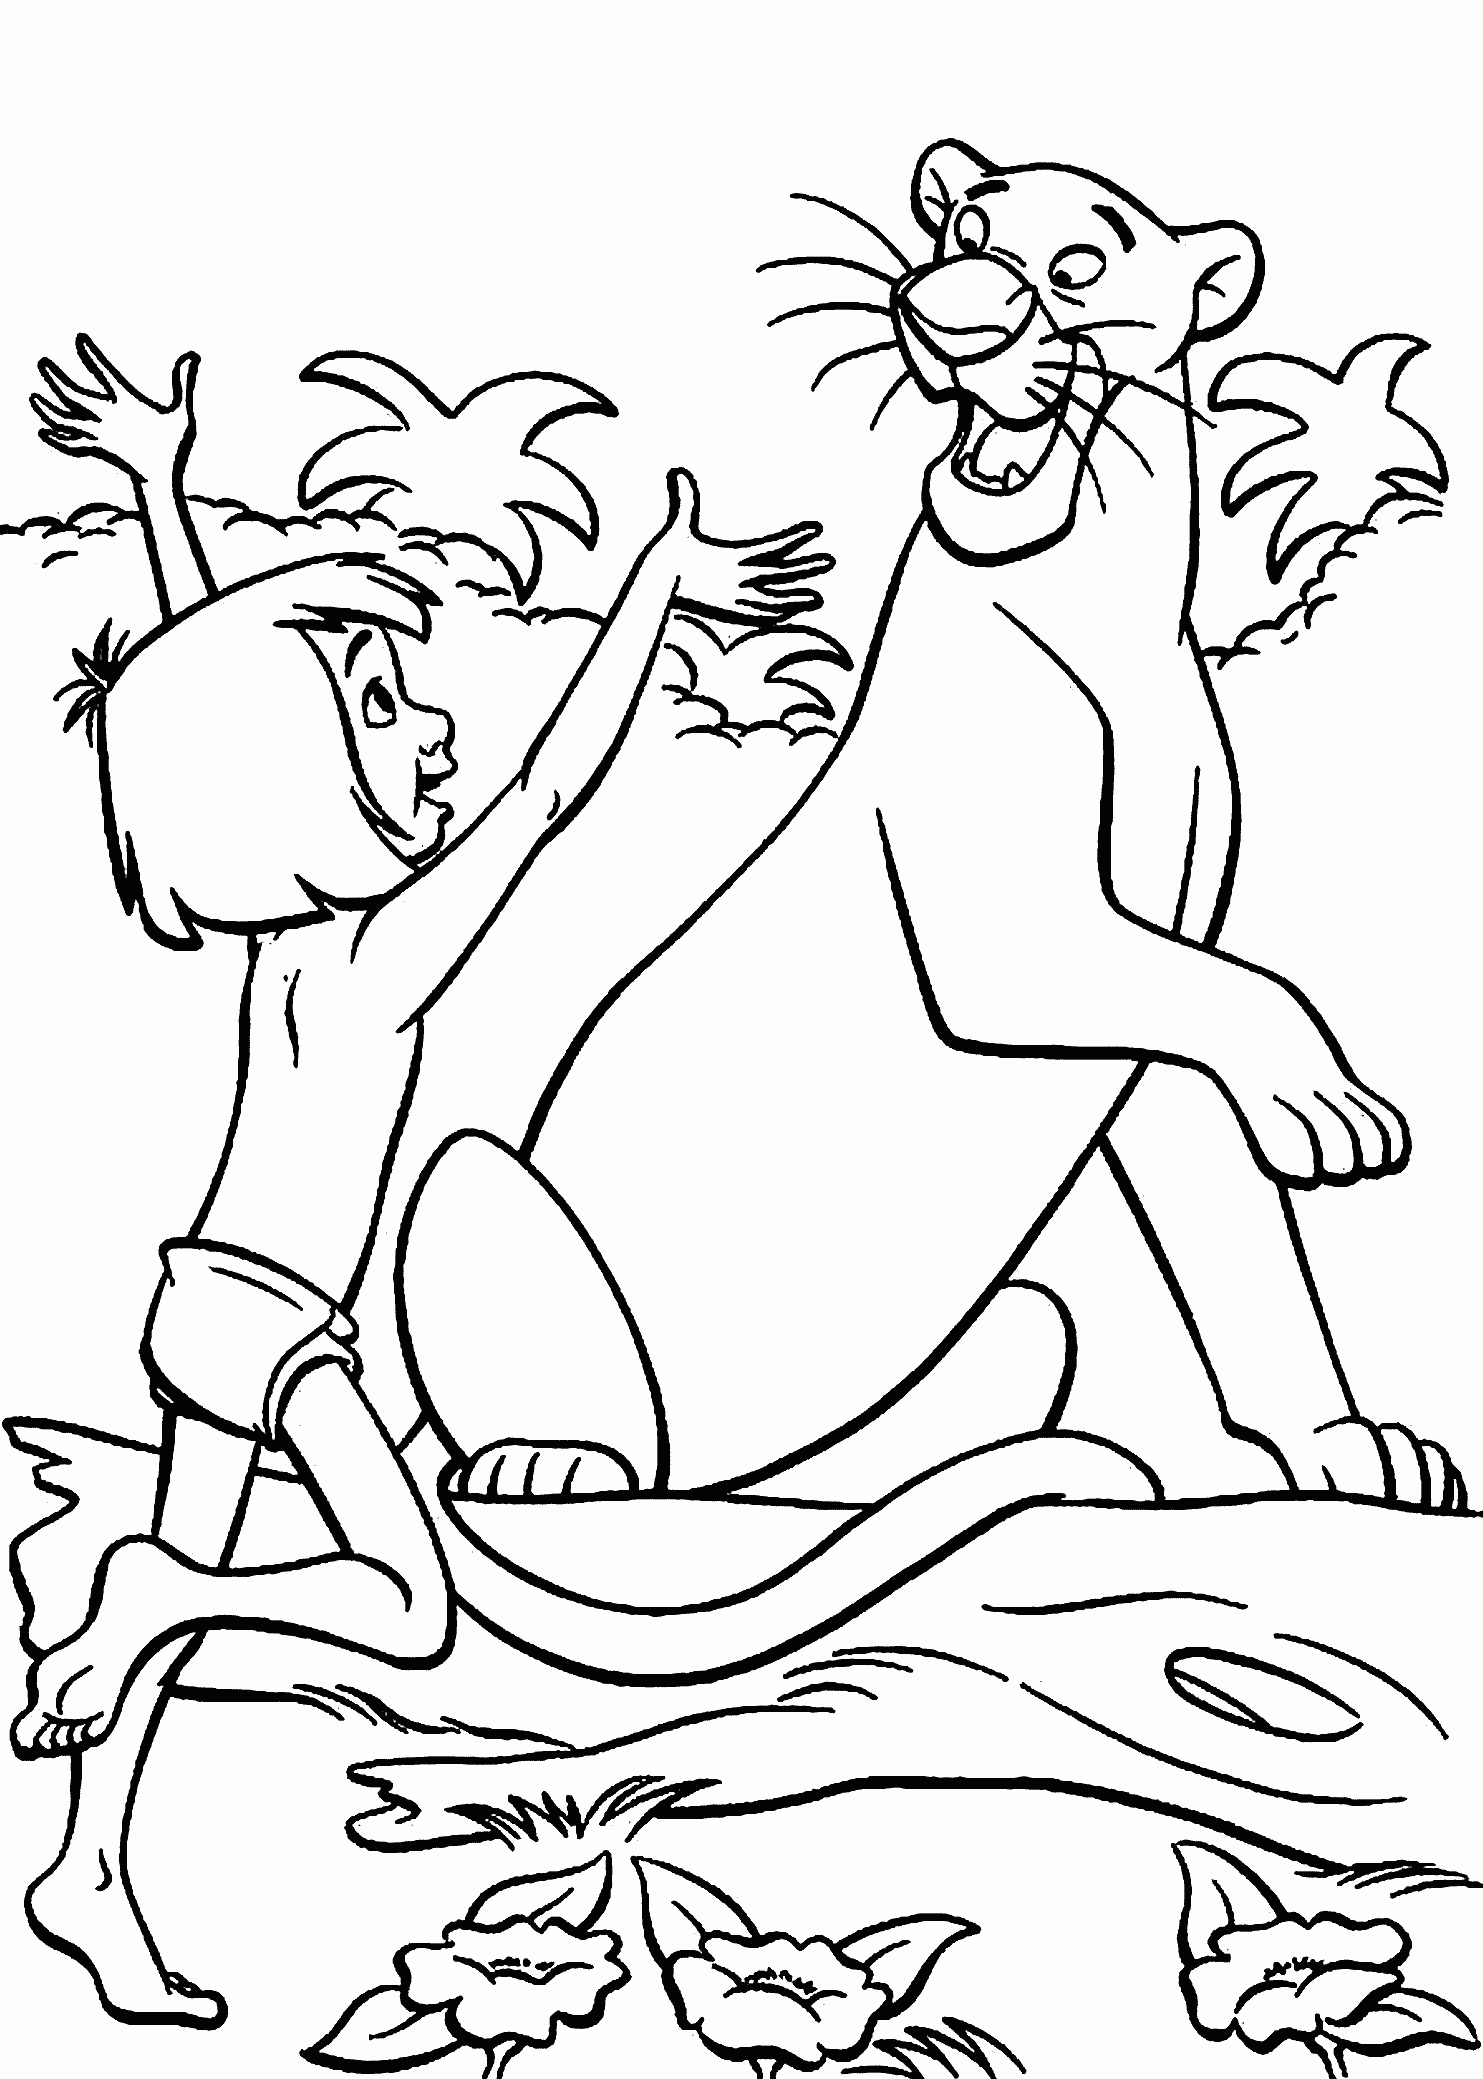 The Jungle Book Coloring Pages For Kids, Printable Free (С avec Book Coloriage